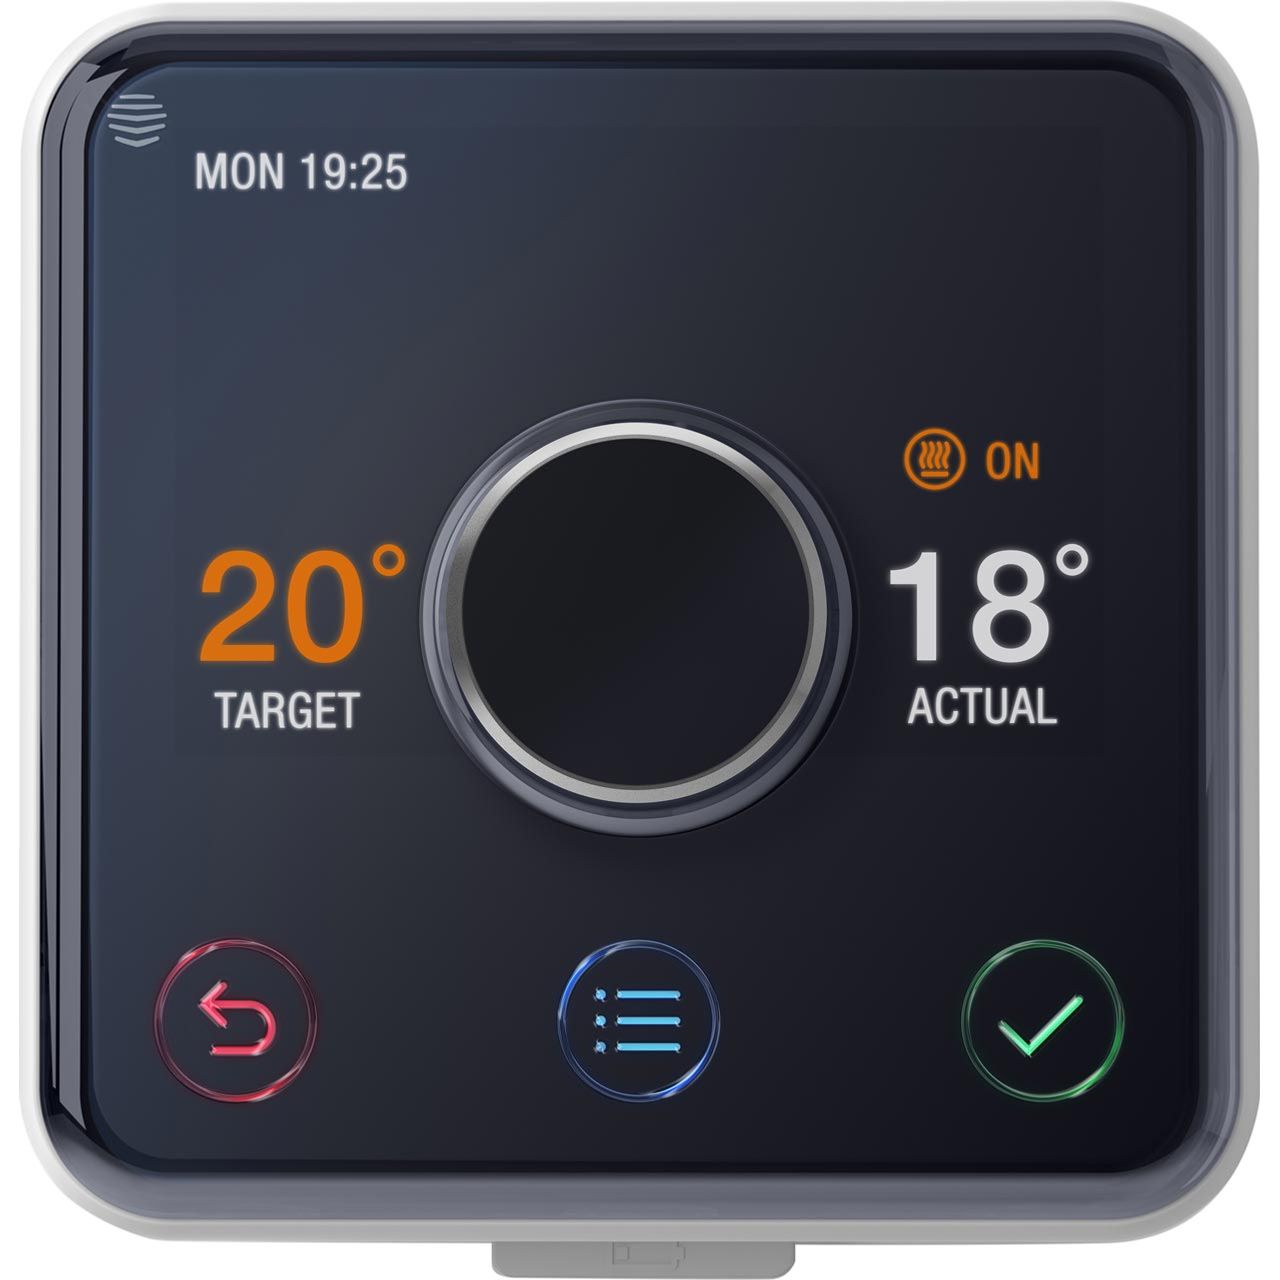 Hive Active Heating & Hot Water Smart Thermostat Kit Review